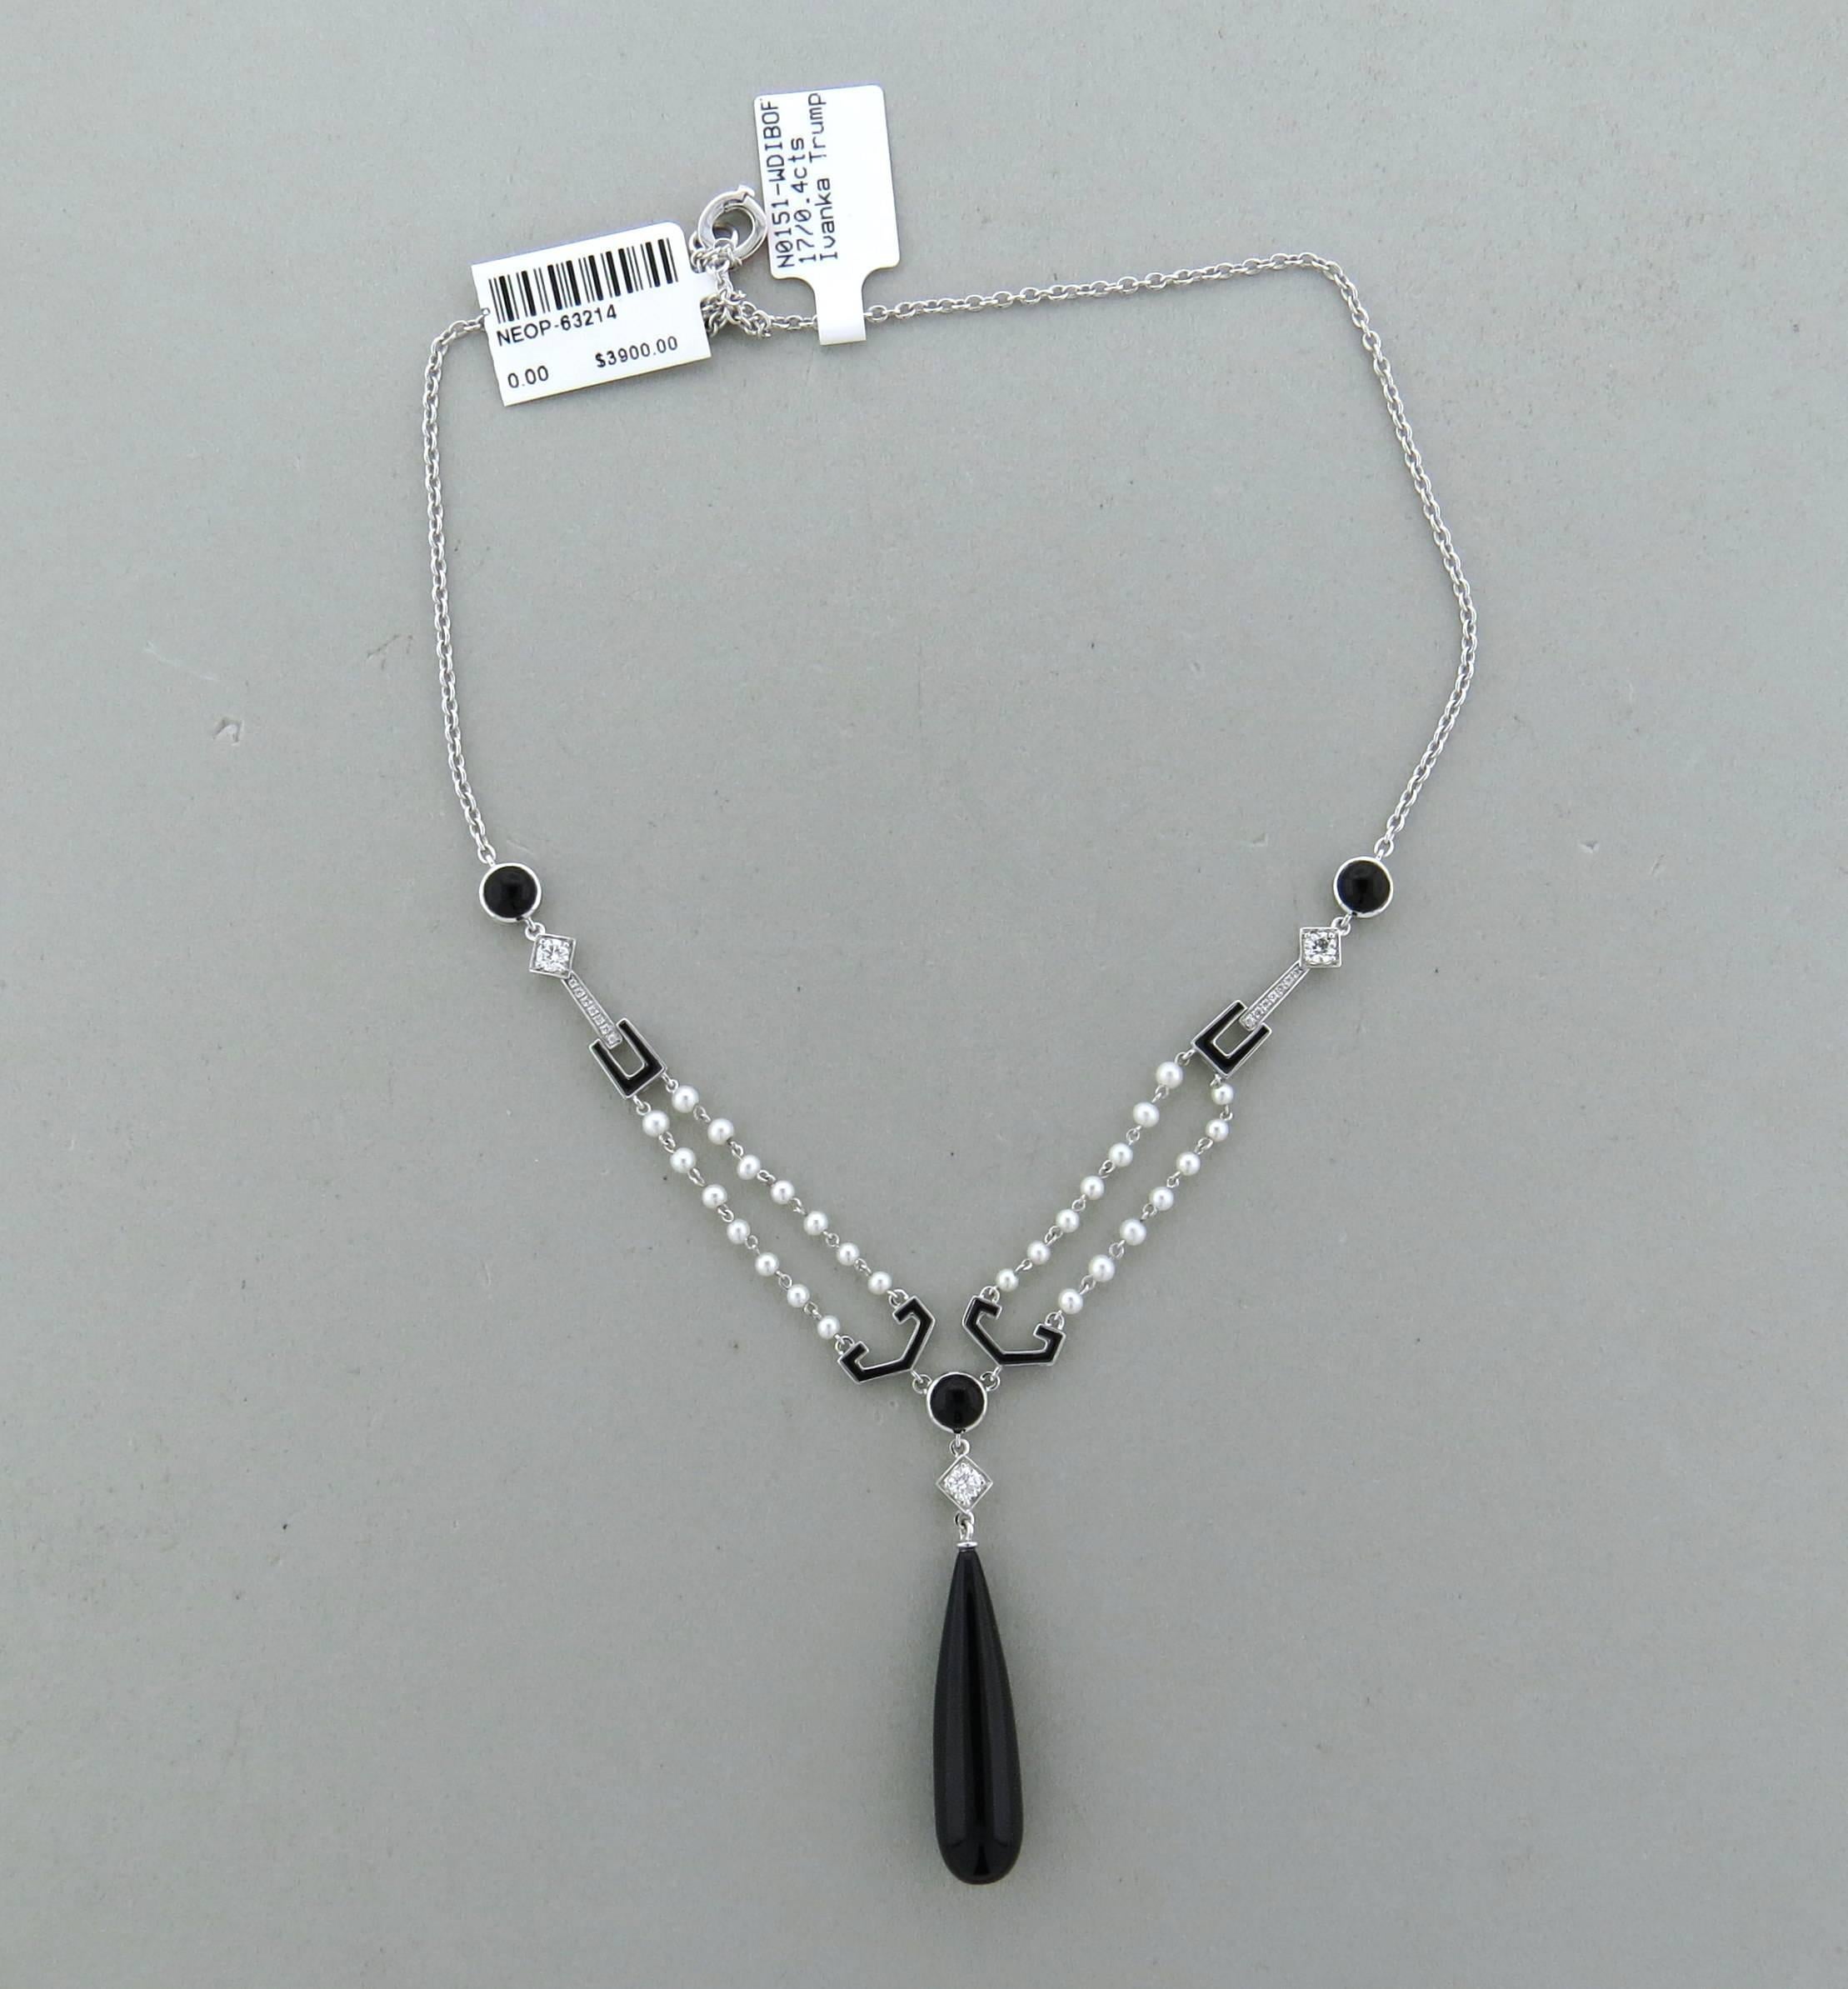 A new 18k white gold necklace, crafted by Ivanka Trump, decorated with approx. 0.40ctw in G/VS diamonds and onyx stones. Necklace is 16